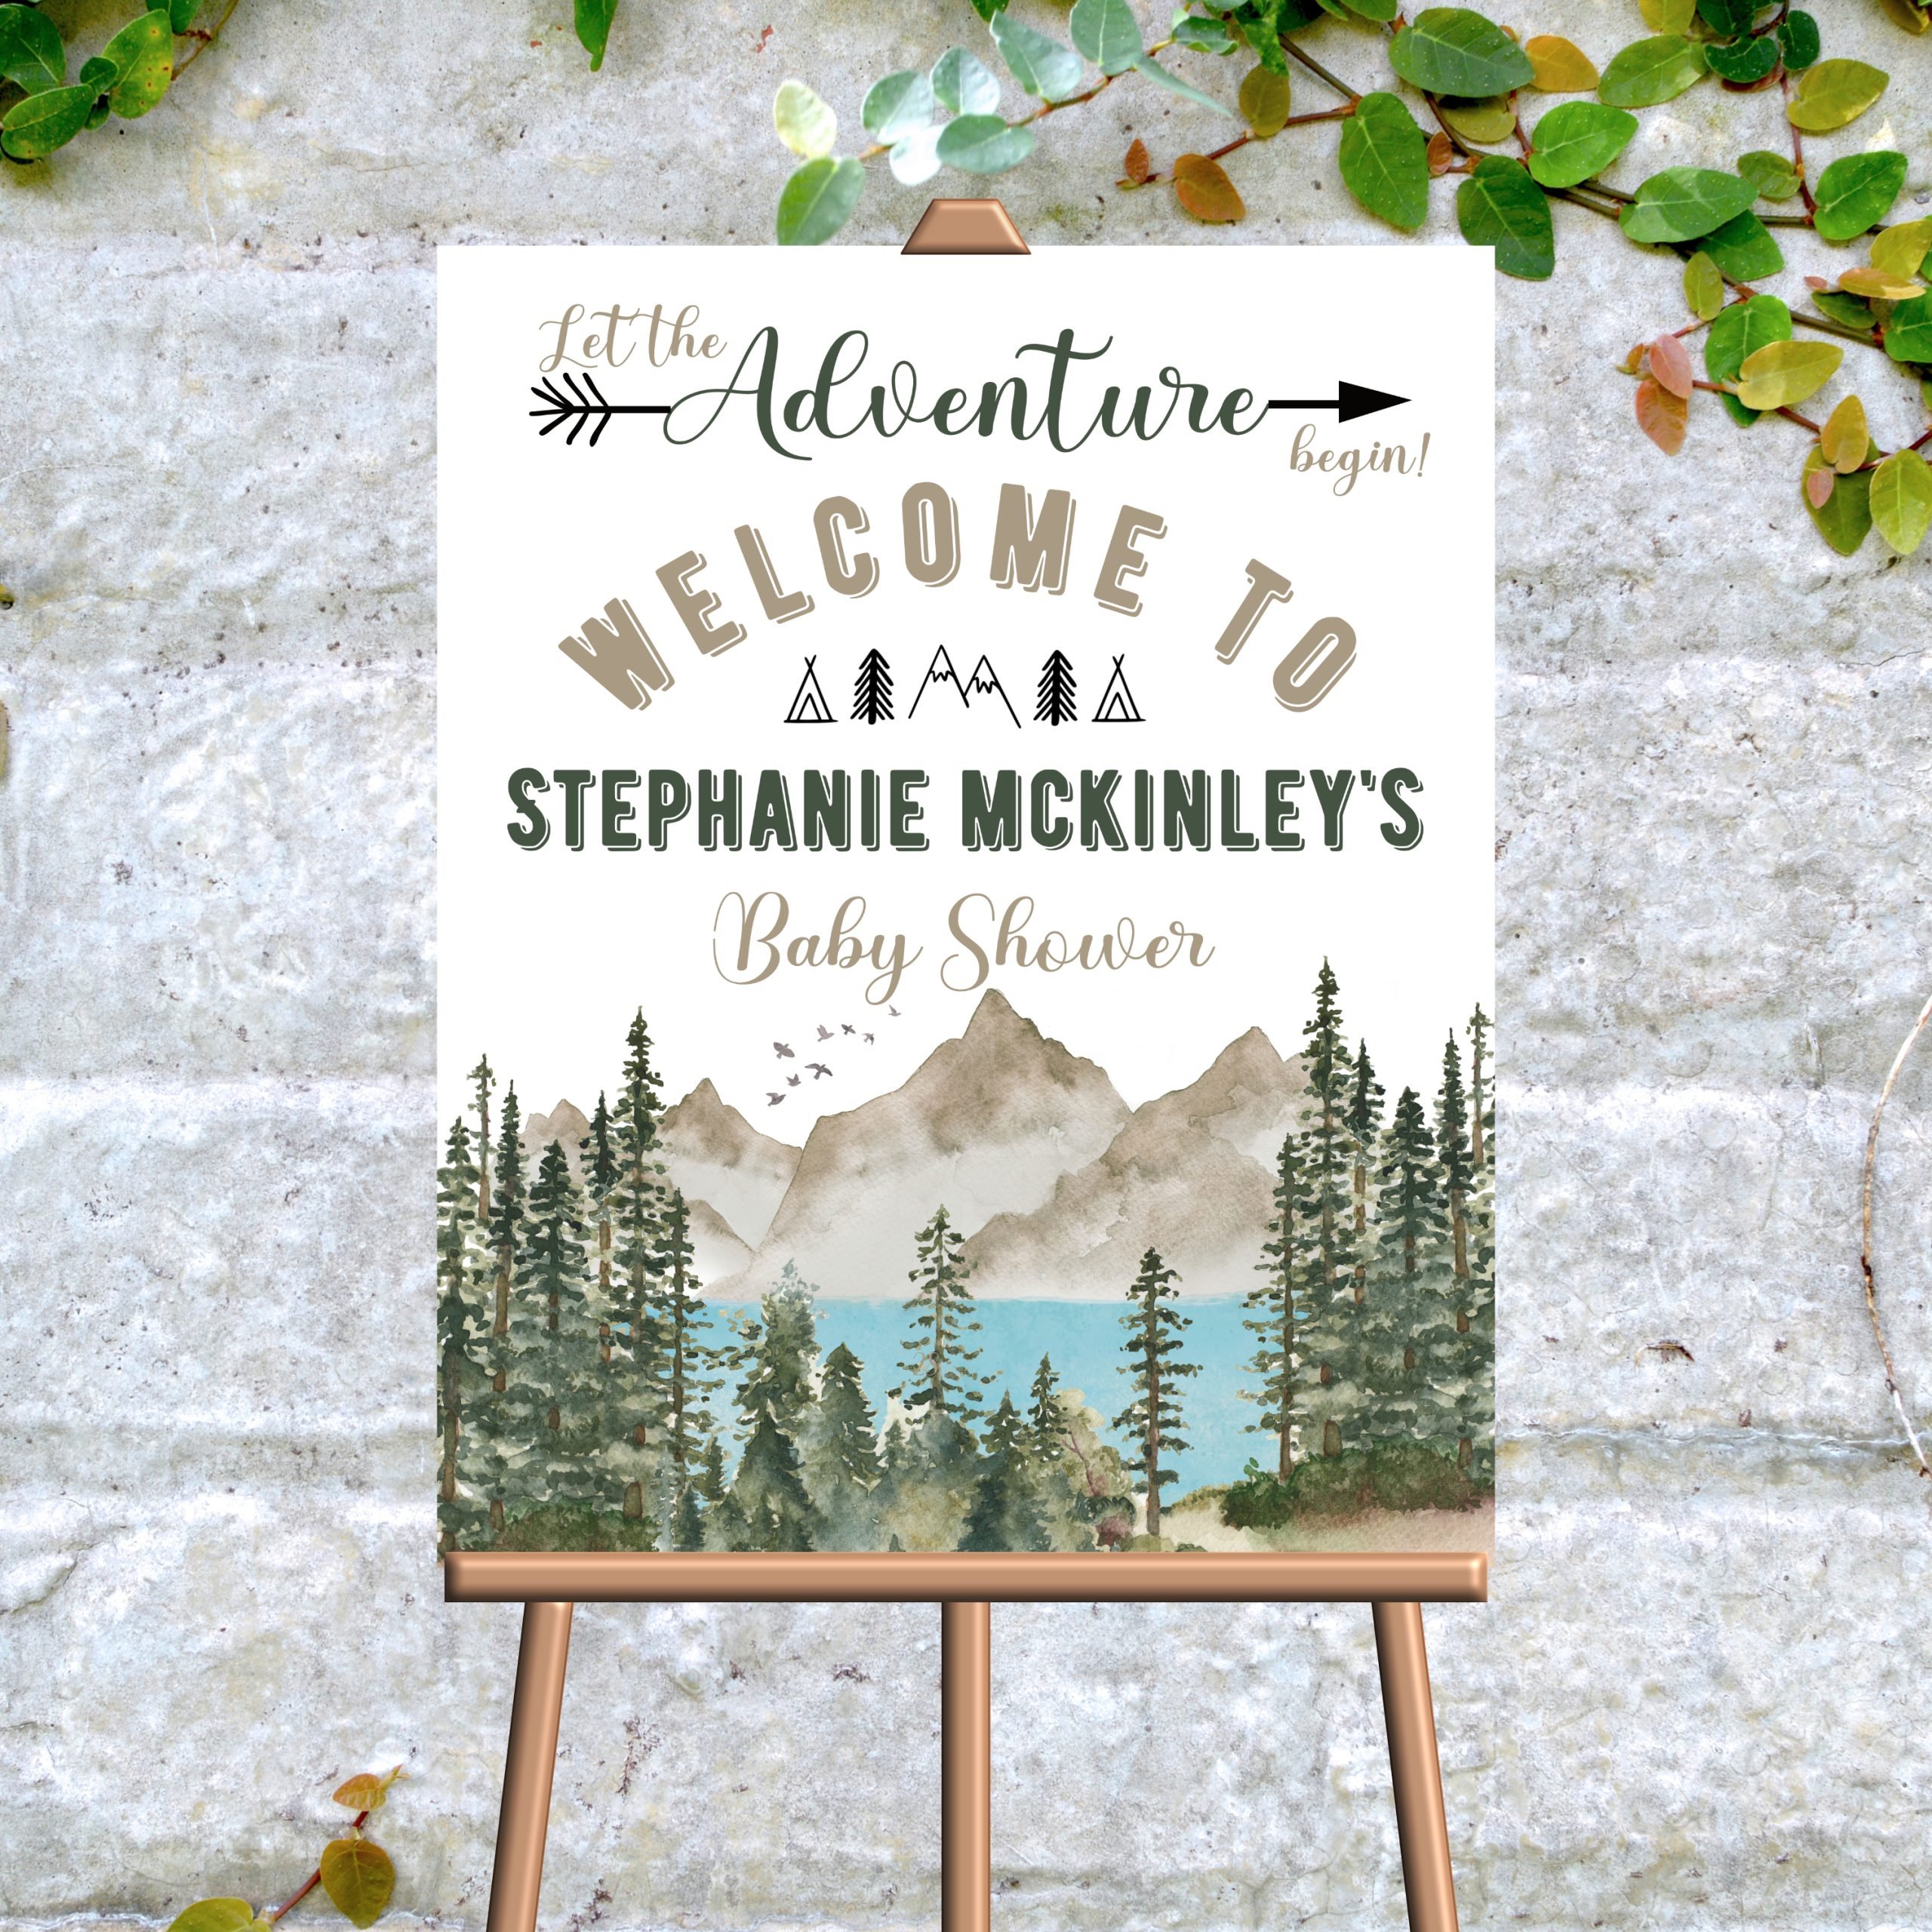 DECOR | SIGNS Editable Let the Adventure Begin Welcome Sign | Forest Mountain Lake Woodland Baby Shower Decor | Corjl Template | Digital PRINTABLE adventure-inspired decor